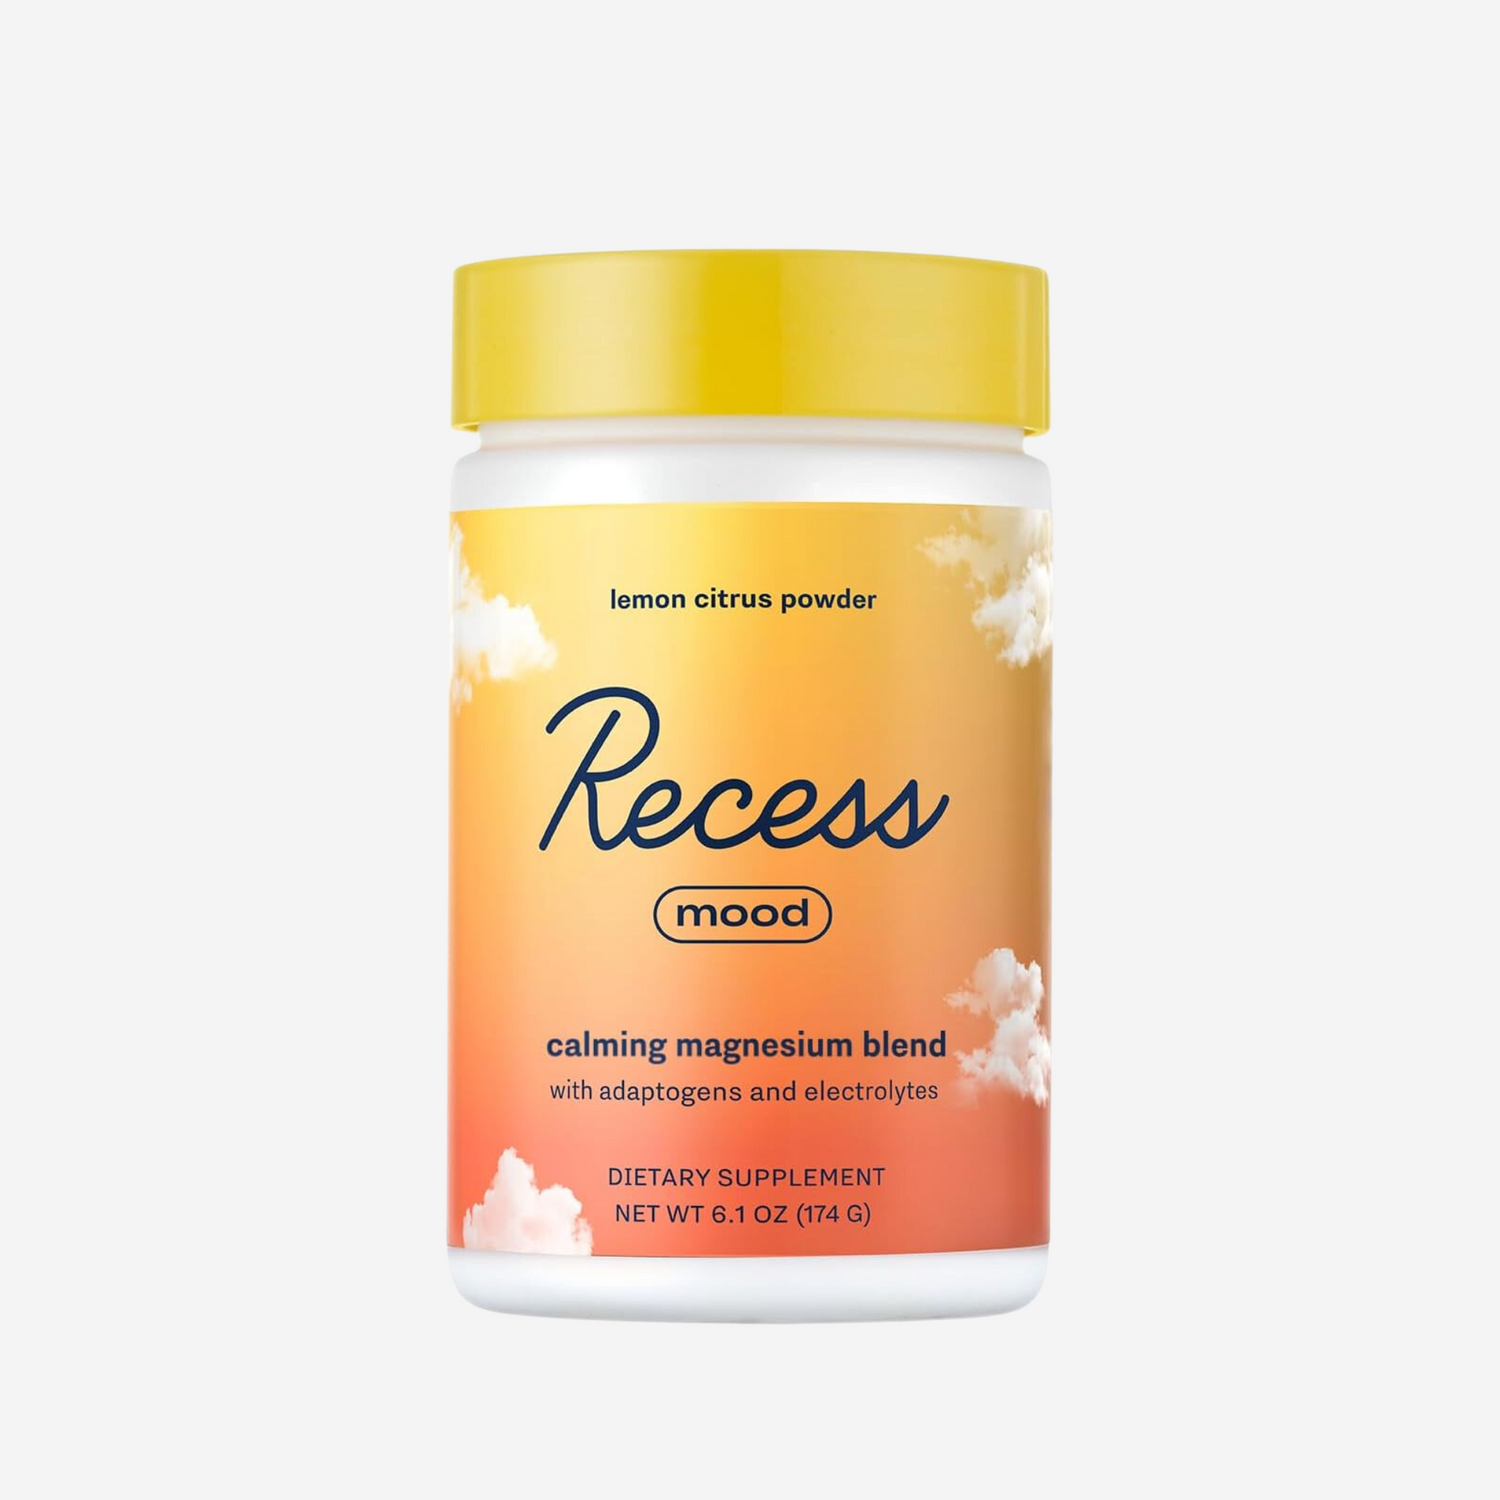 Recess Mood Powder, Calming Magnesium L-Threonate Blend with Passion Flower, L-Theanine, Electrolytes, Magnesium Calm Support Powder Supplement -  28 Serving Tub